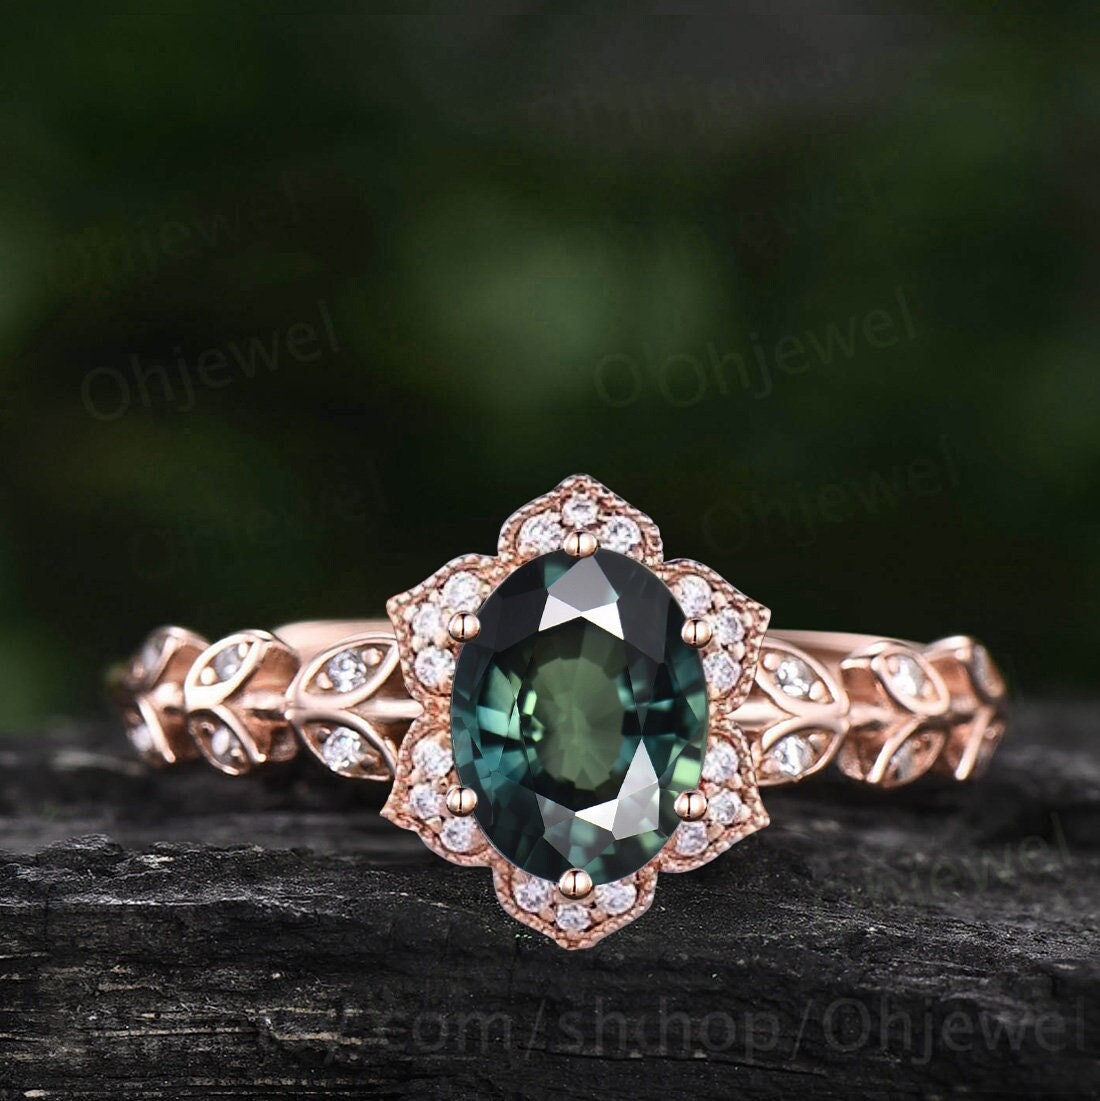 Vintage oval cut green teal sapphire engagement ring art deco flower leaf halo diamond ring 14k rose gold unique wedding promise ring women